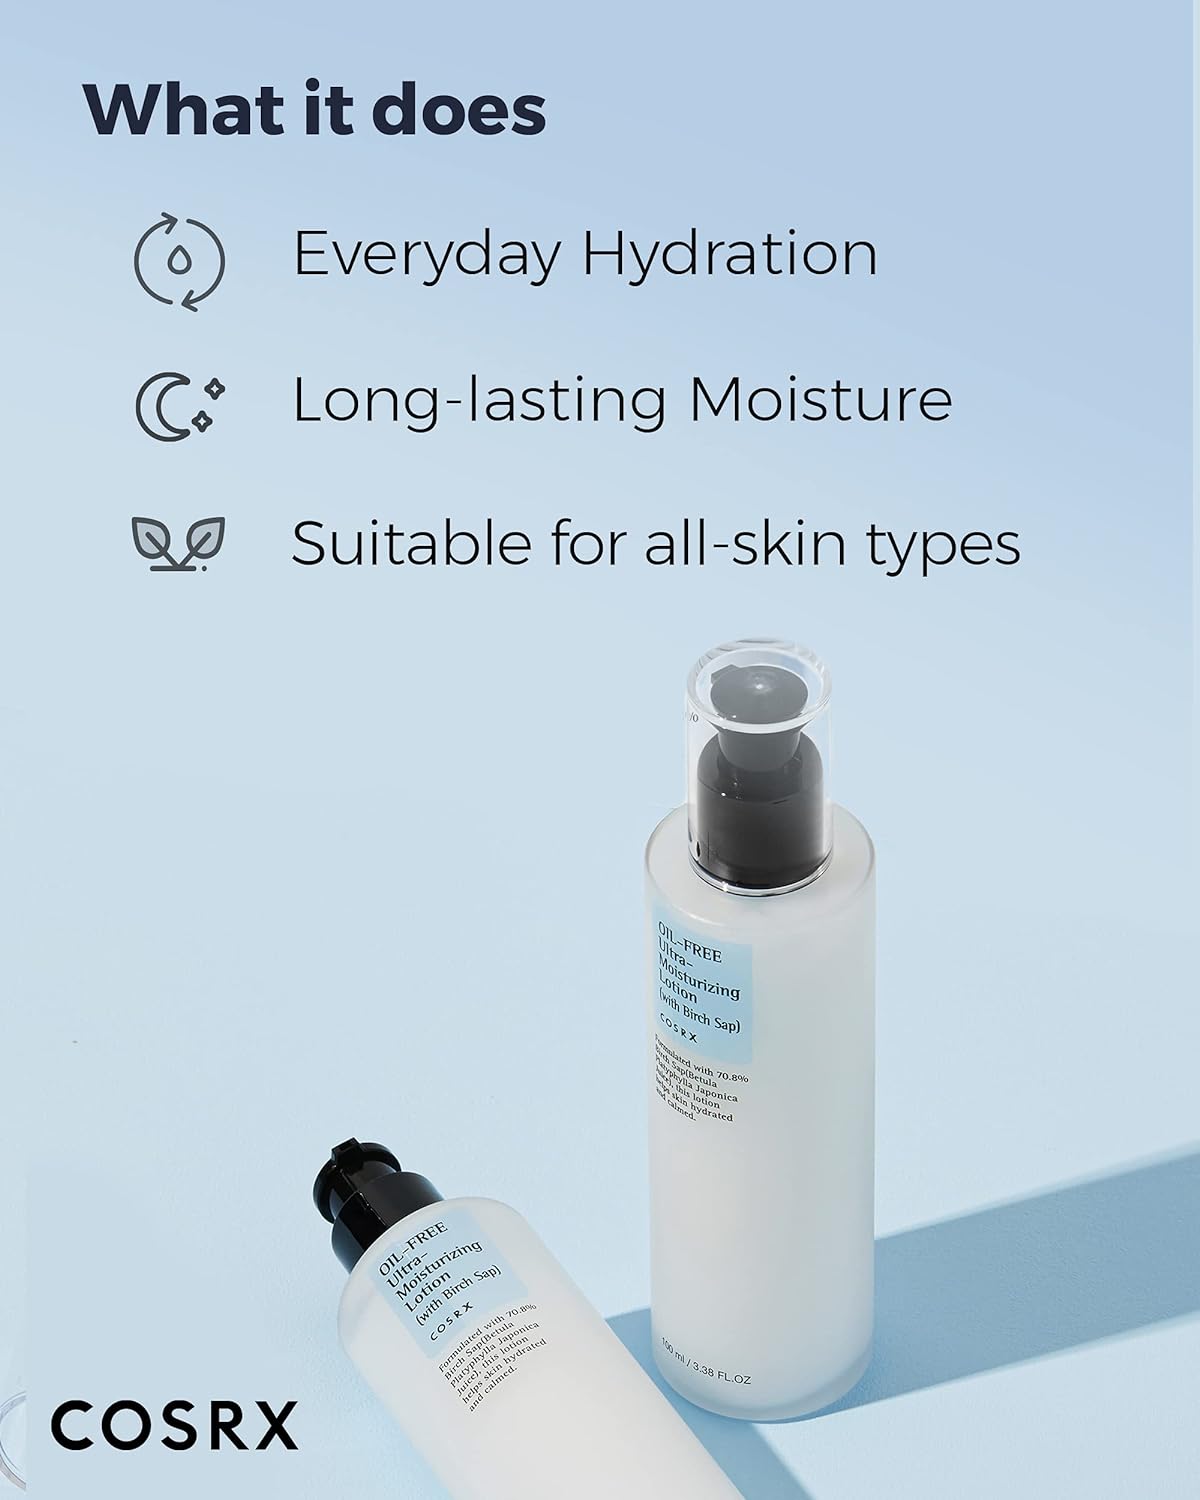 COSRX, Oil-Free Ultra-Moisturizing Lotion with Birch Sap 100ml All About Skin Doha Skincare Qatar Beauty Cosmetics Available in Qatar Available in Qatar Store all about skin doha qatar skincare cosmetics beauty